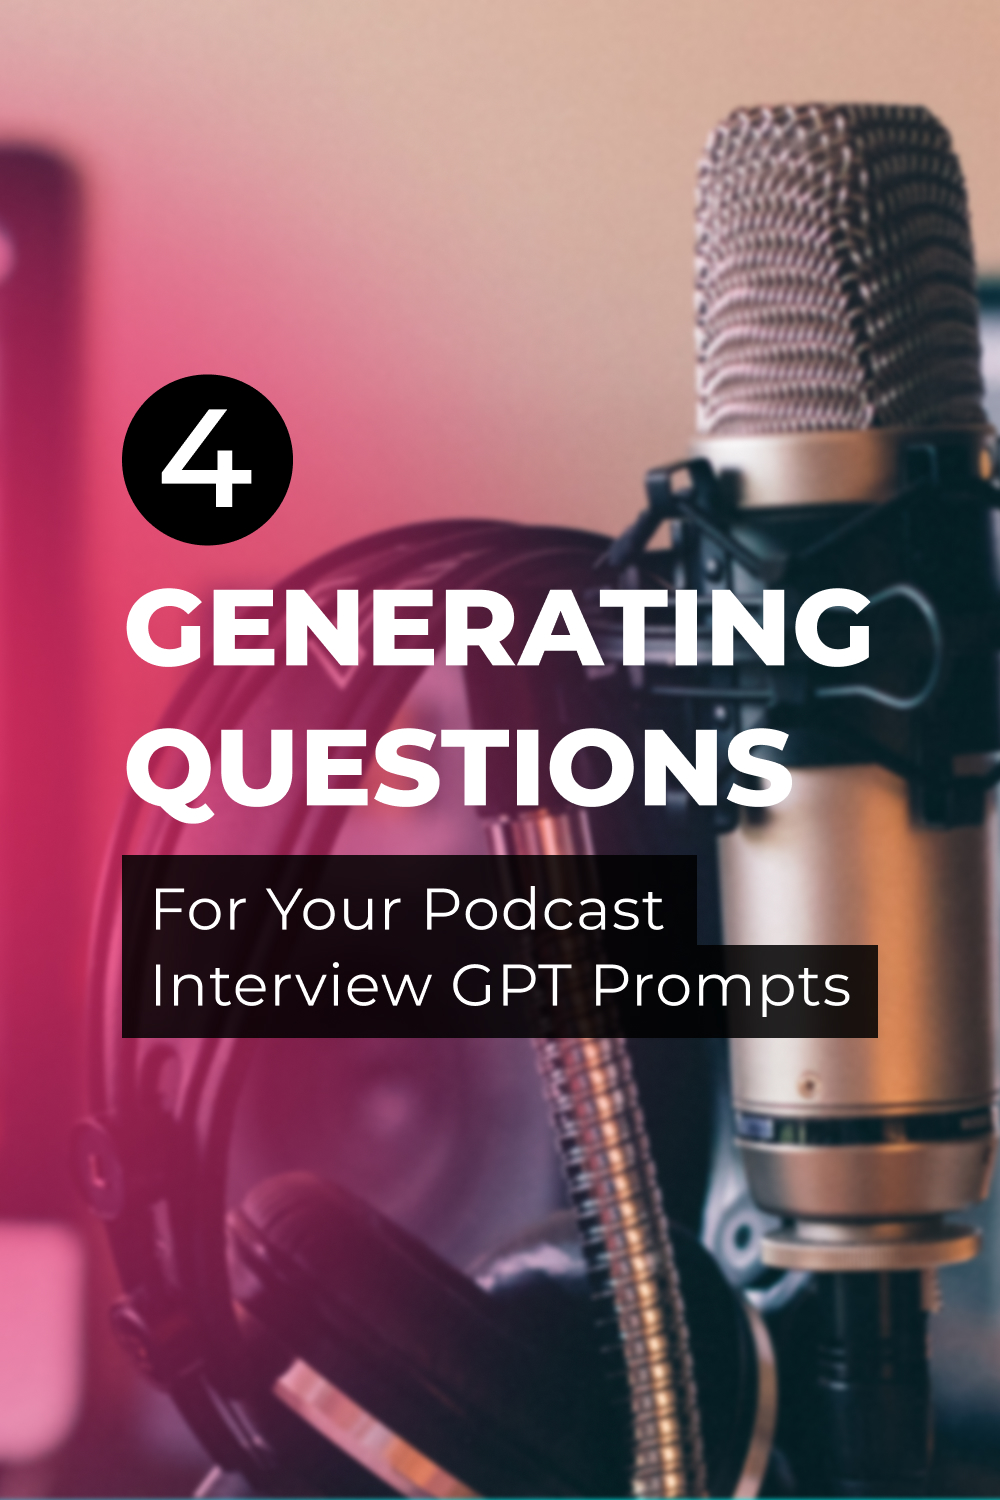 4 generating questions for your podcast interview 1 686